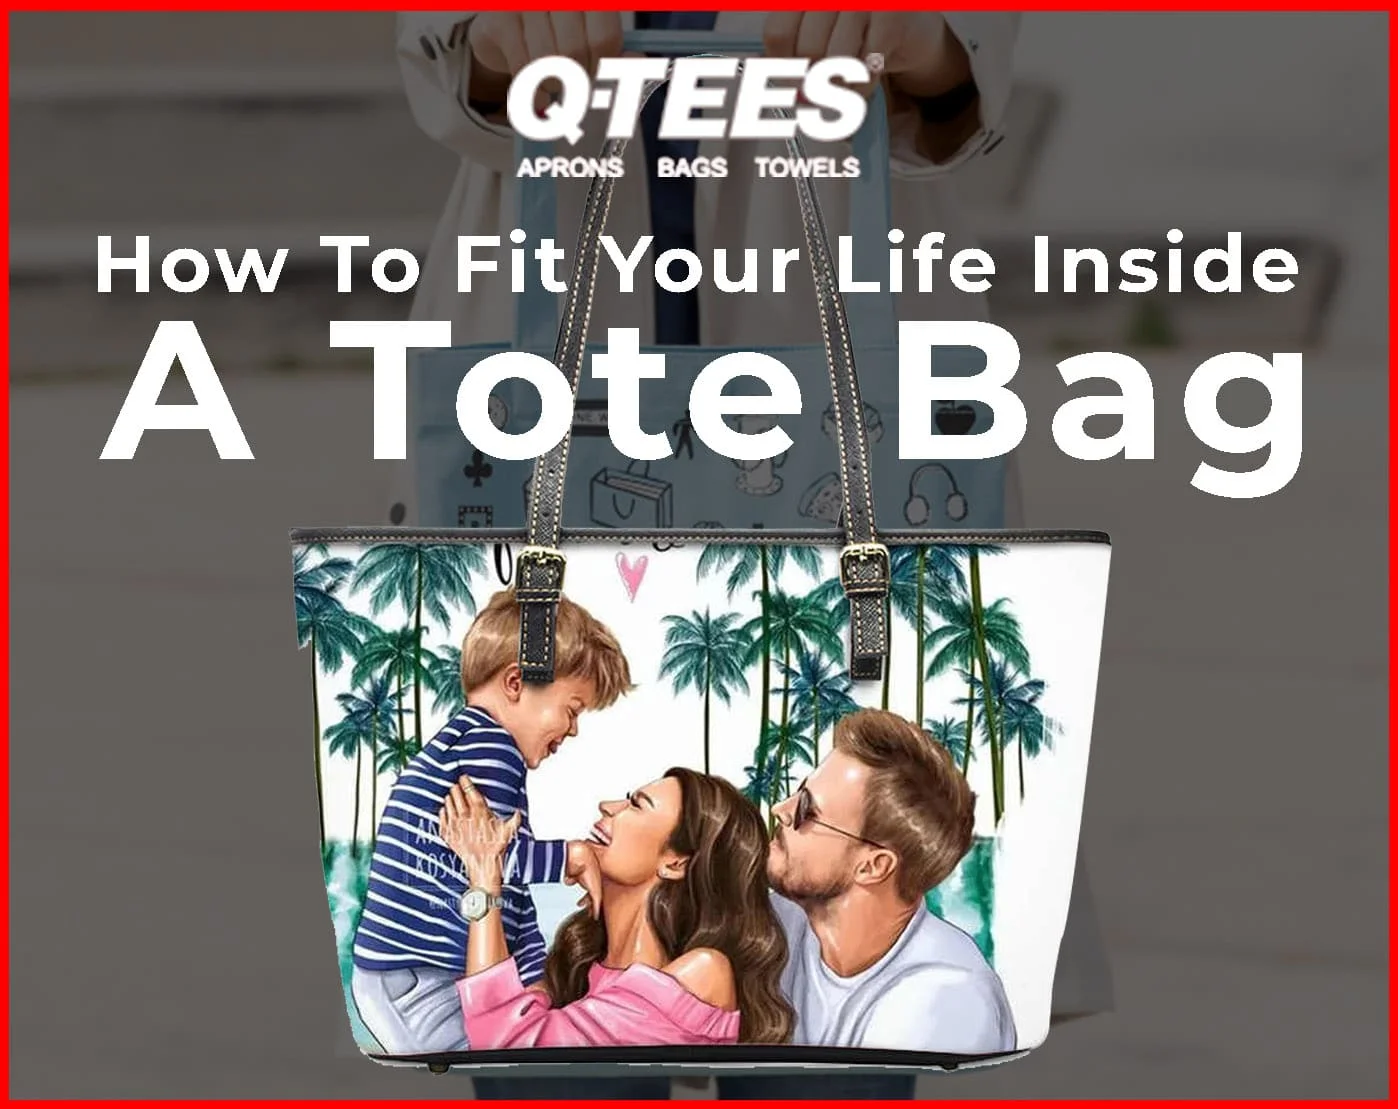 How To Fit Your Life Inside A Tote Bag - economical tote bags qtees